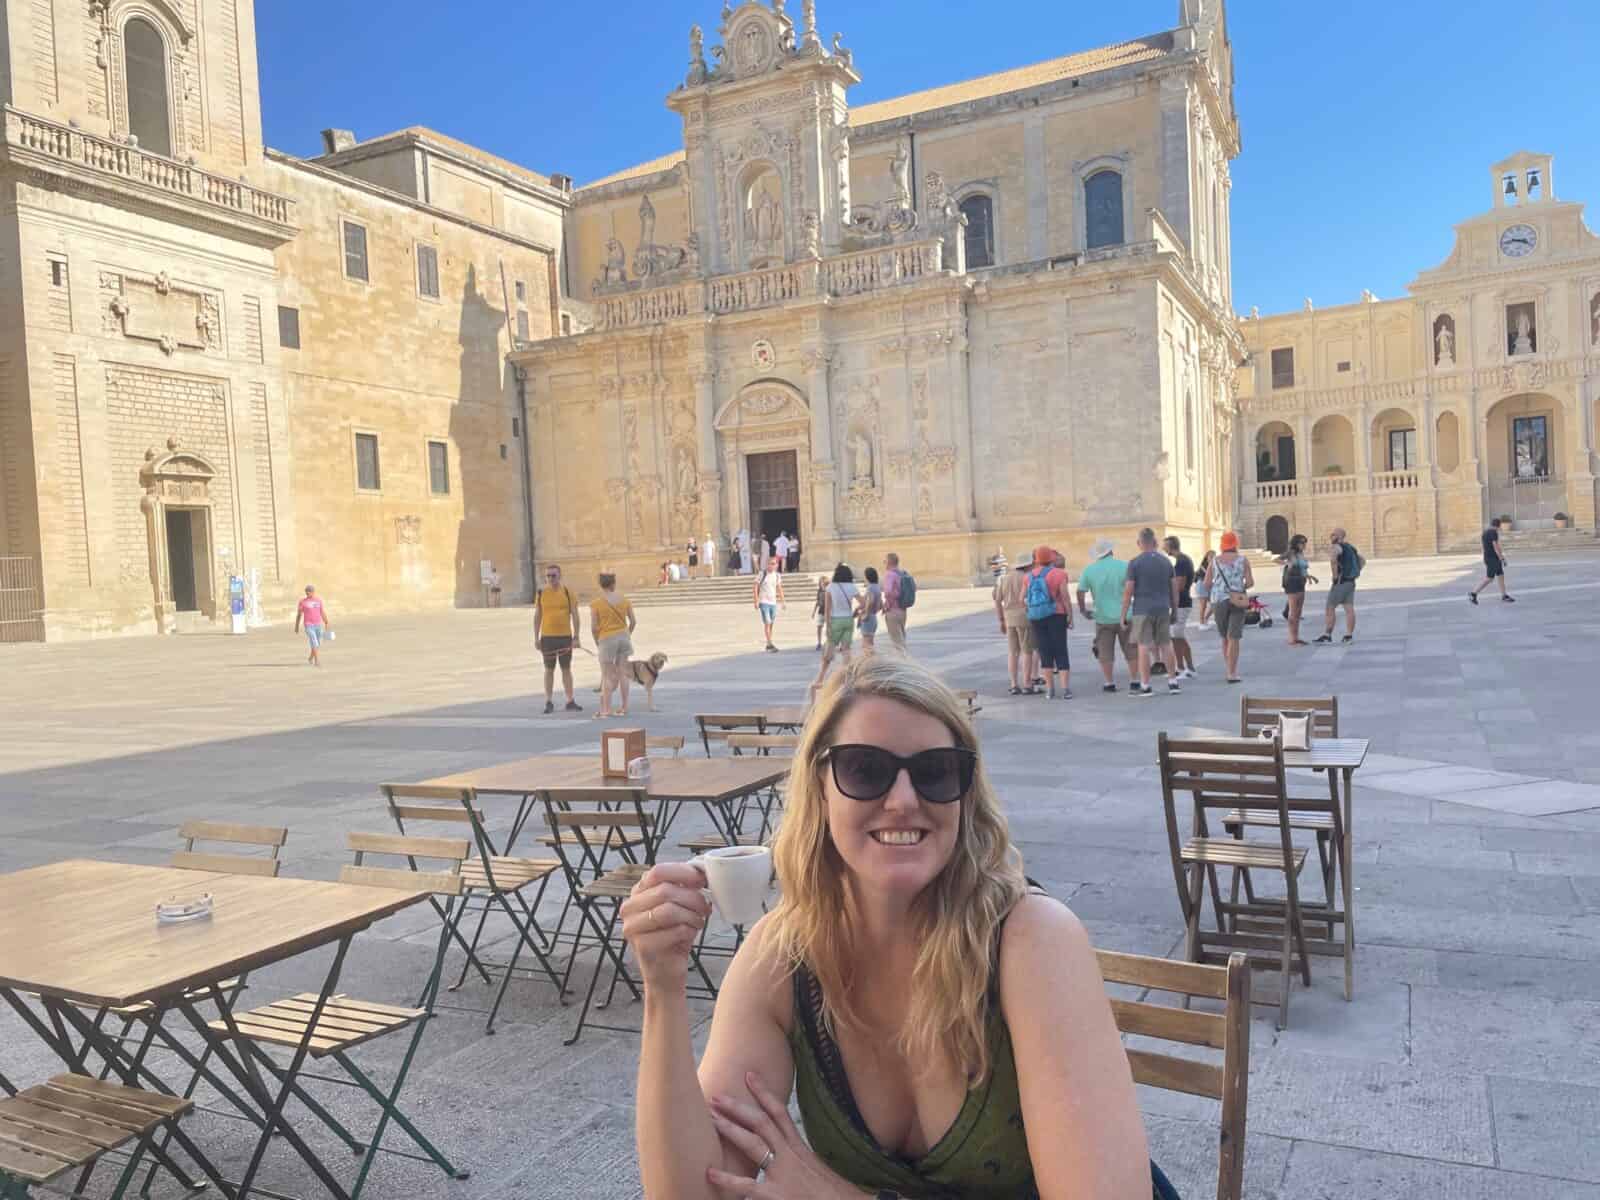 Drinking coffee in Lecce